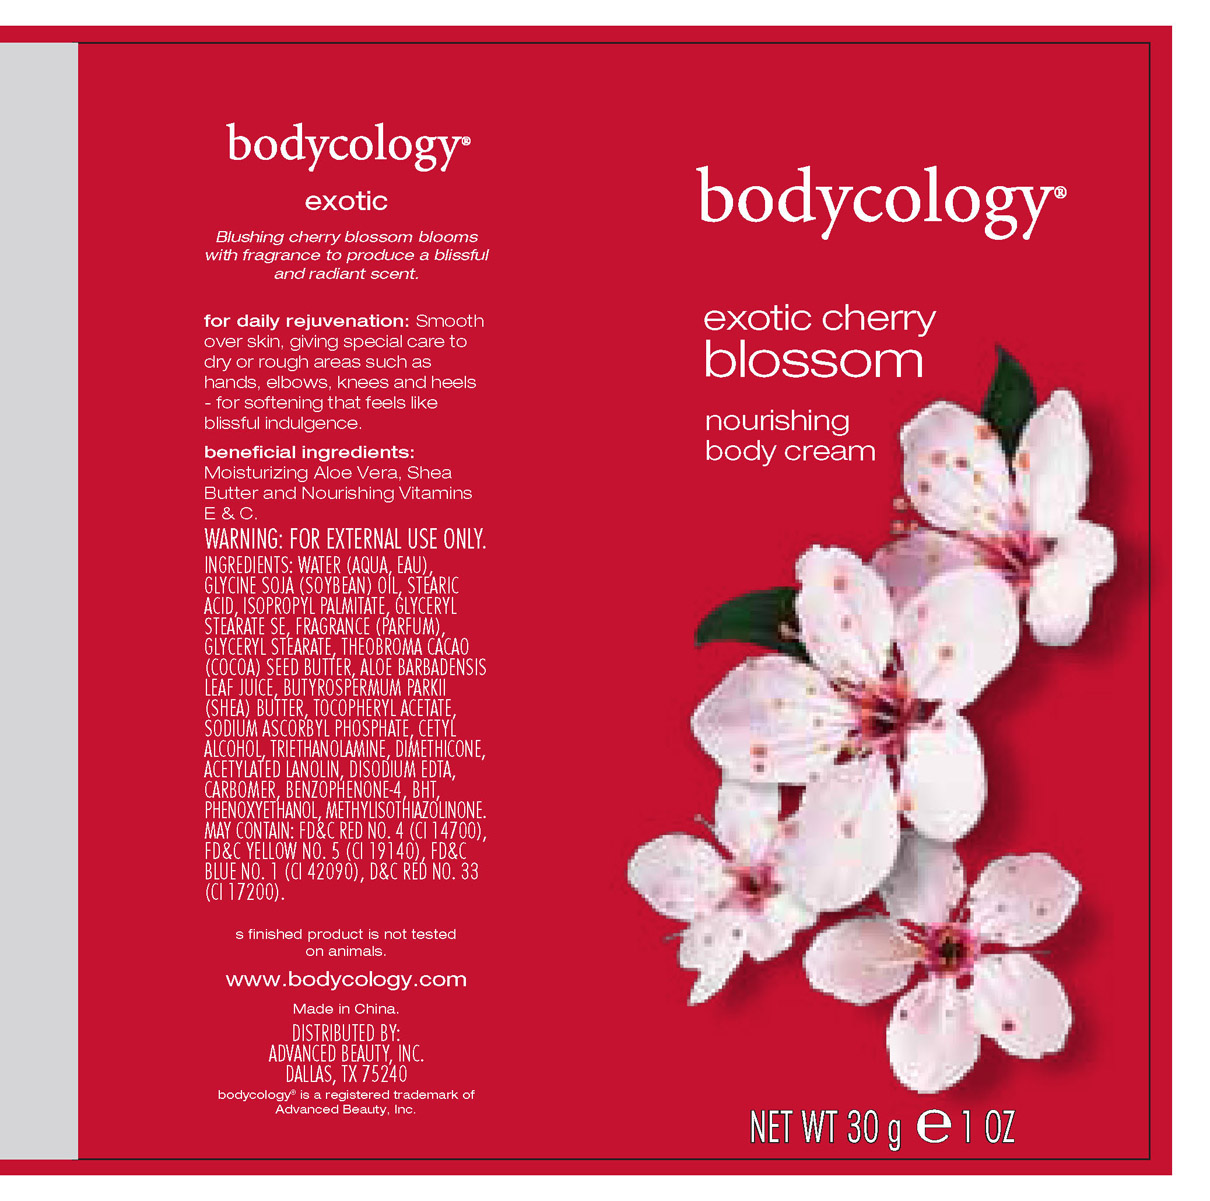 Bodycology Exotic Cherry Blossom Kit (Exotic Cherry Blossom) Kit [Advanced Beauty Systems, Inc.]